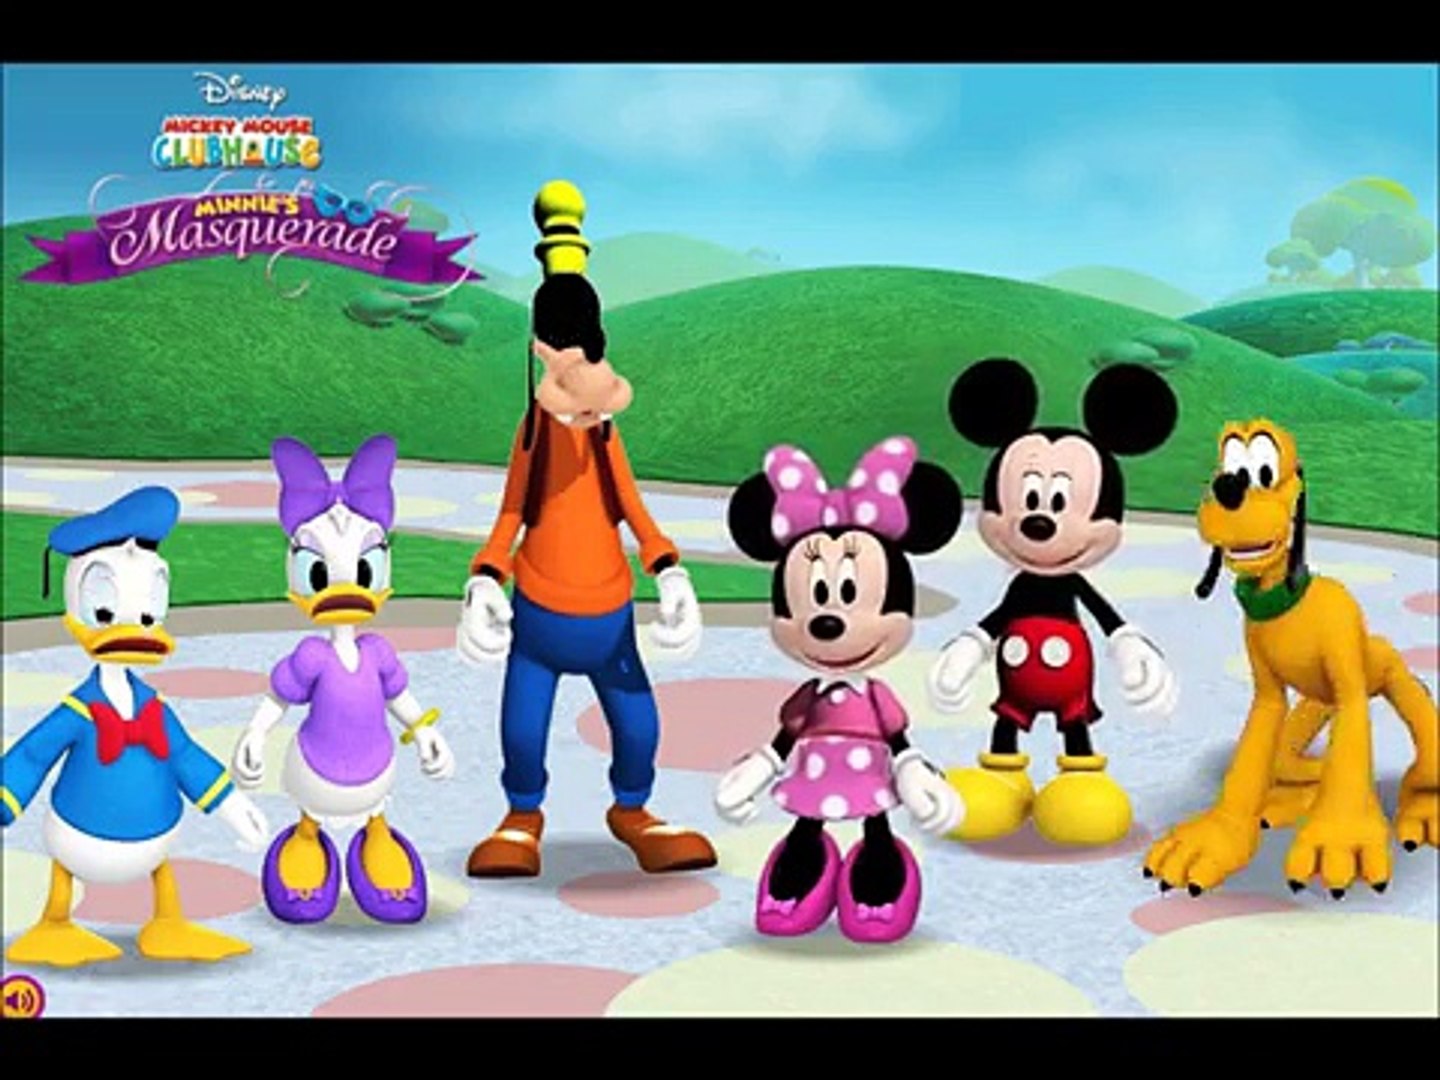 Mickey Mouse Clubhouse Games